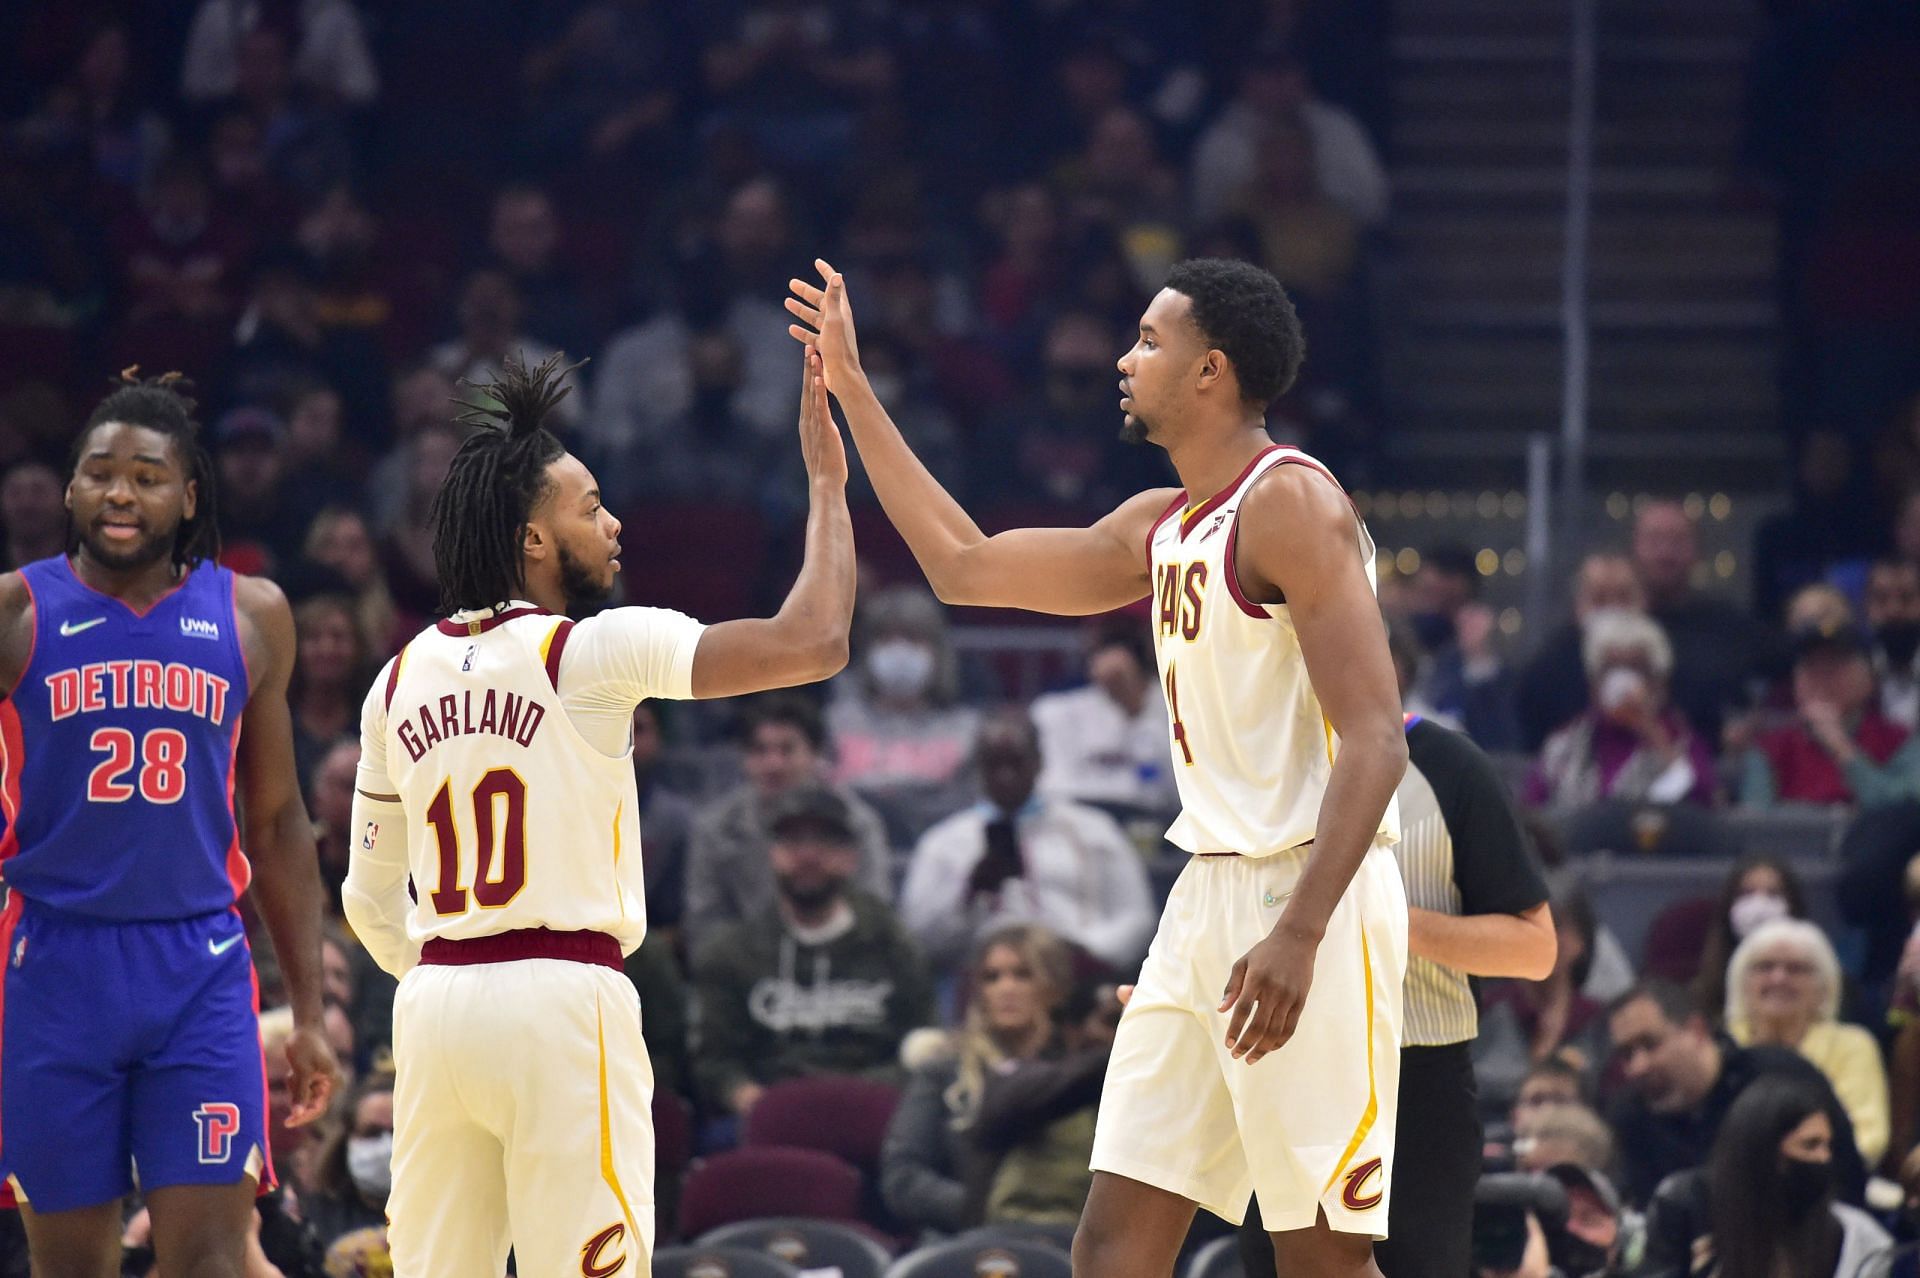 The Cleveland Cavaliers&rsquo; young core is already starting to tap into their enormous potential. [Photo: Factory of Sadness]